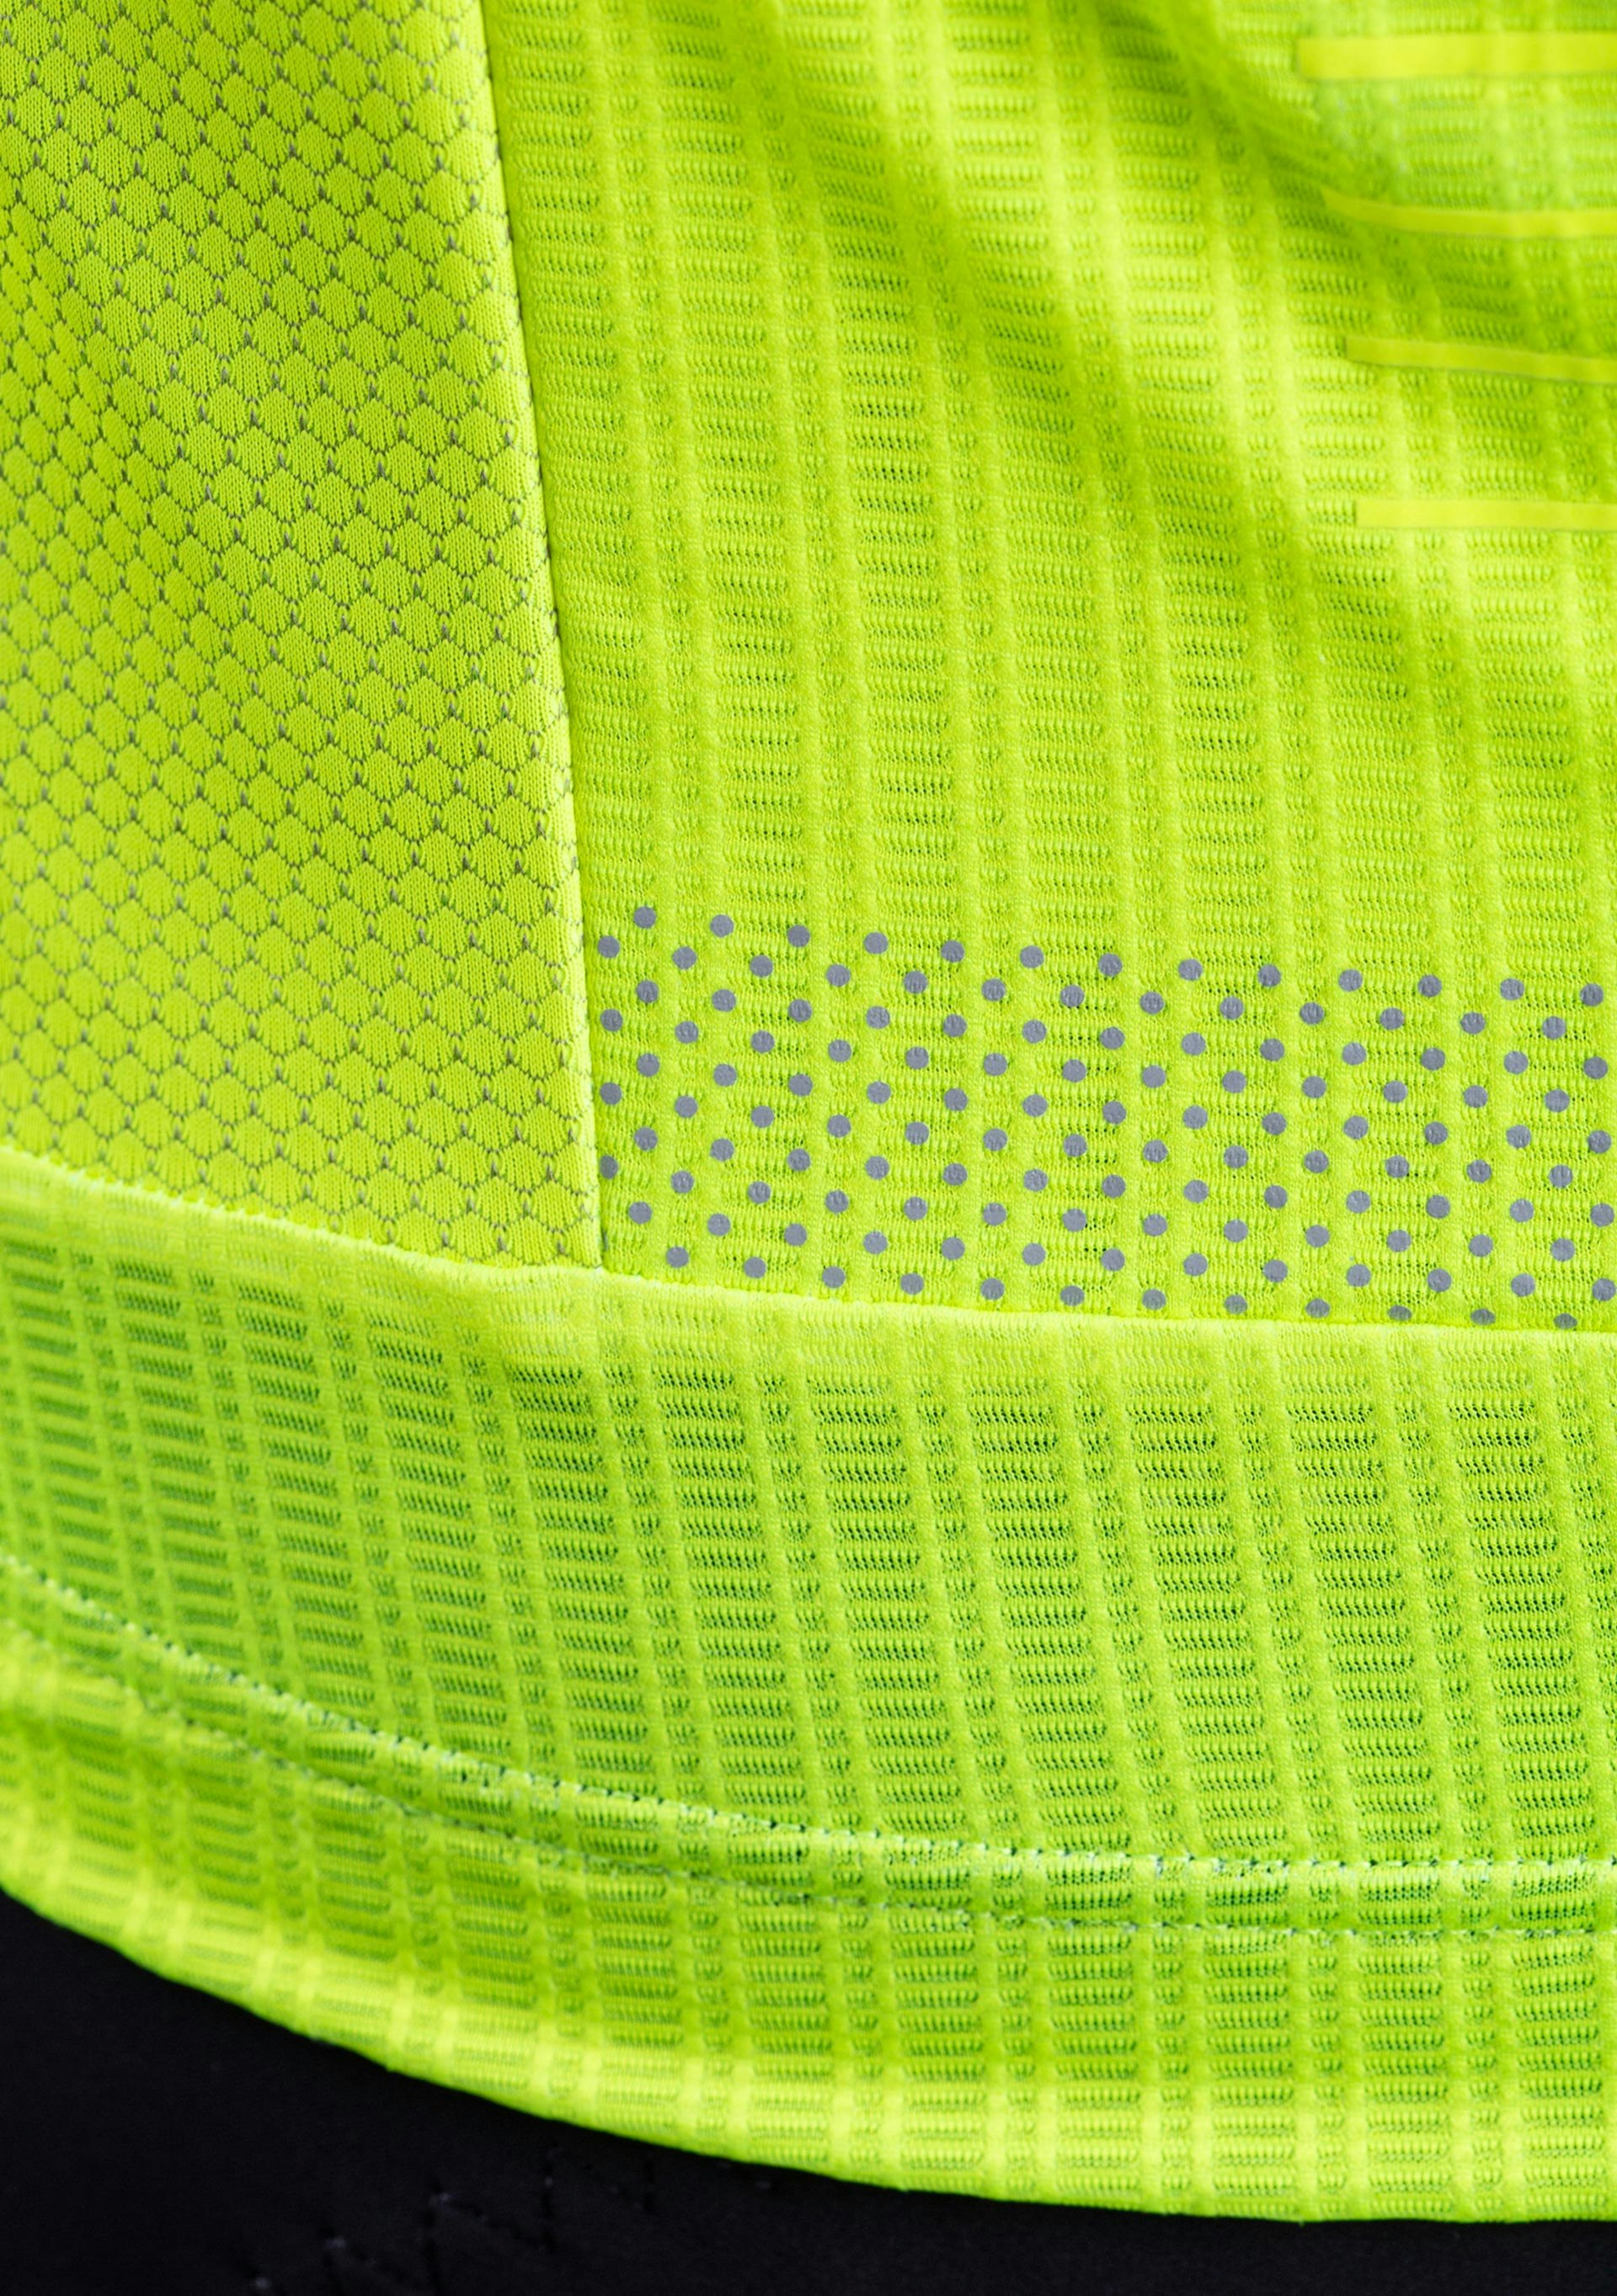 R-EV1 SILVER COOLING MEN SHORT SLEEVE JERSEY Yellow Fluo